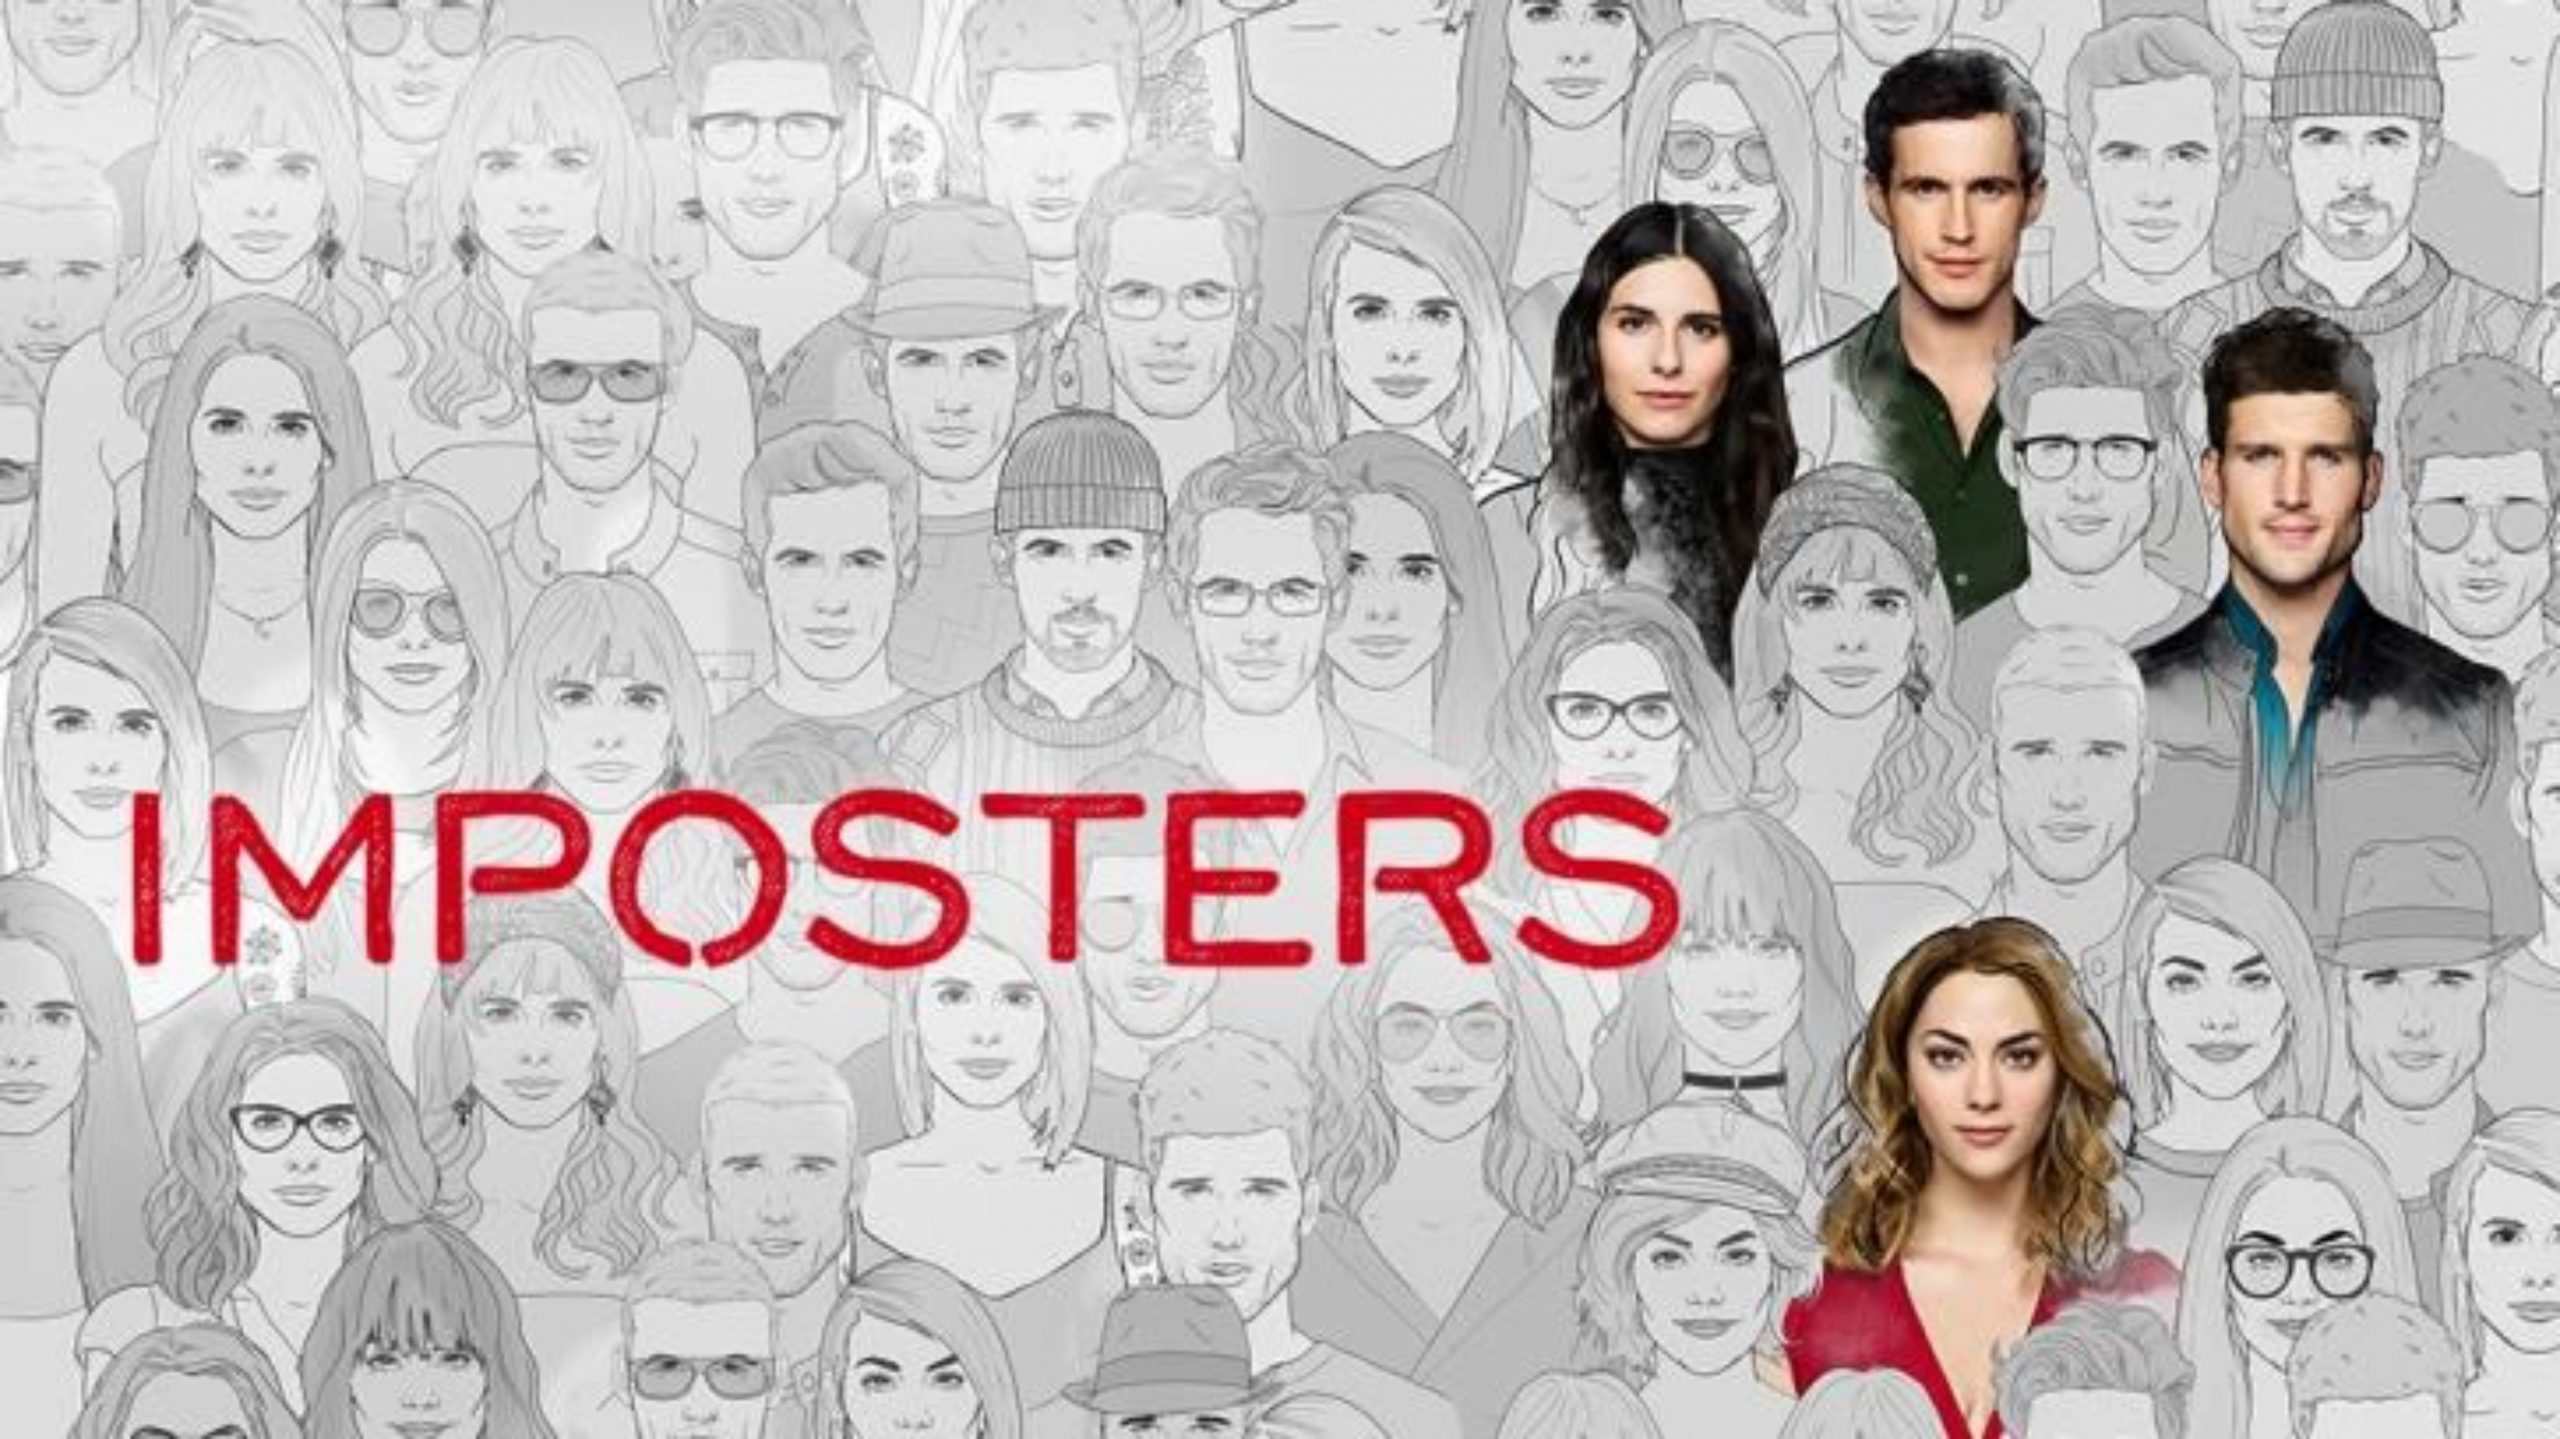 Poster of the dark comedy, Imposters